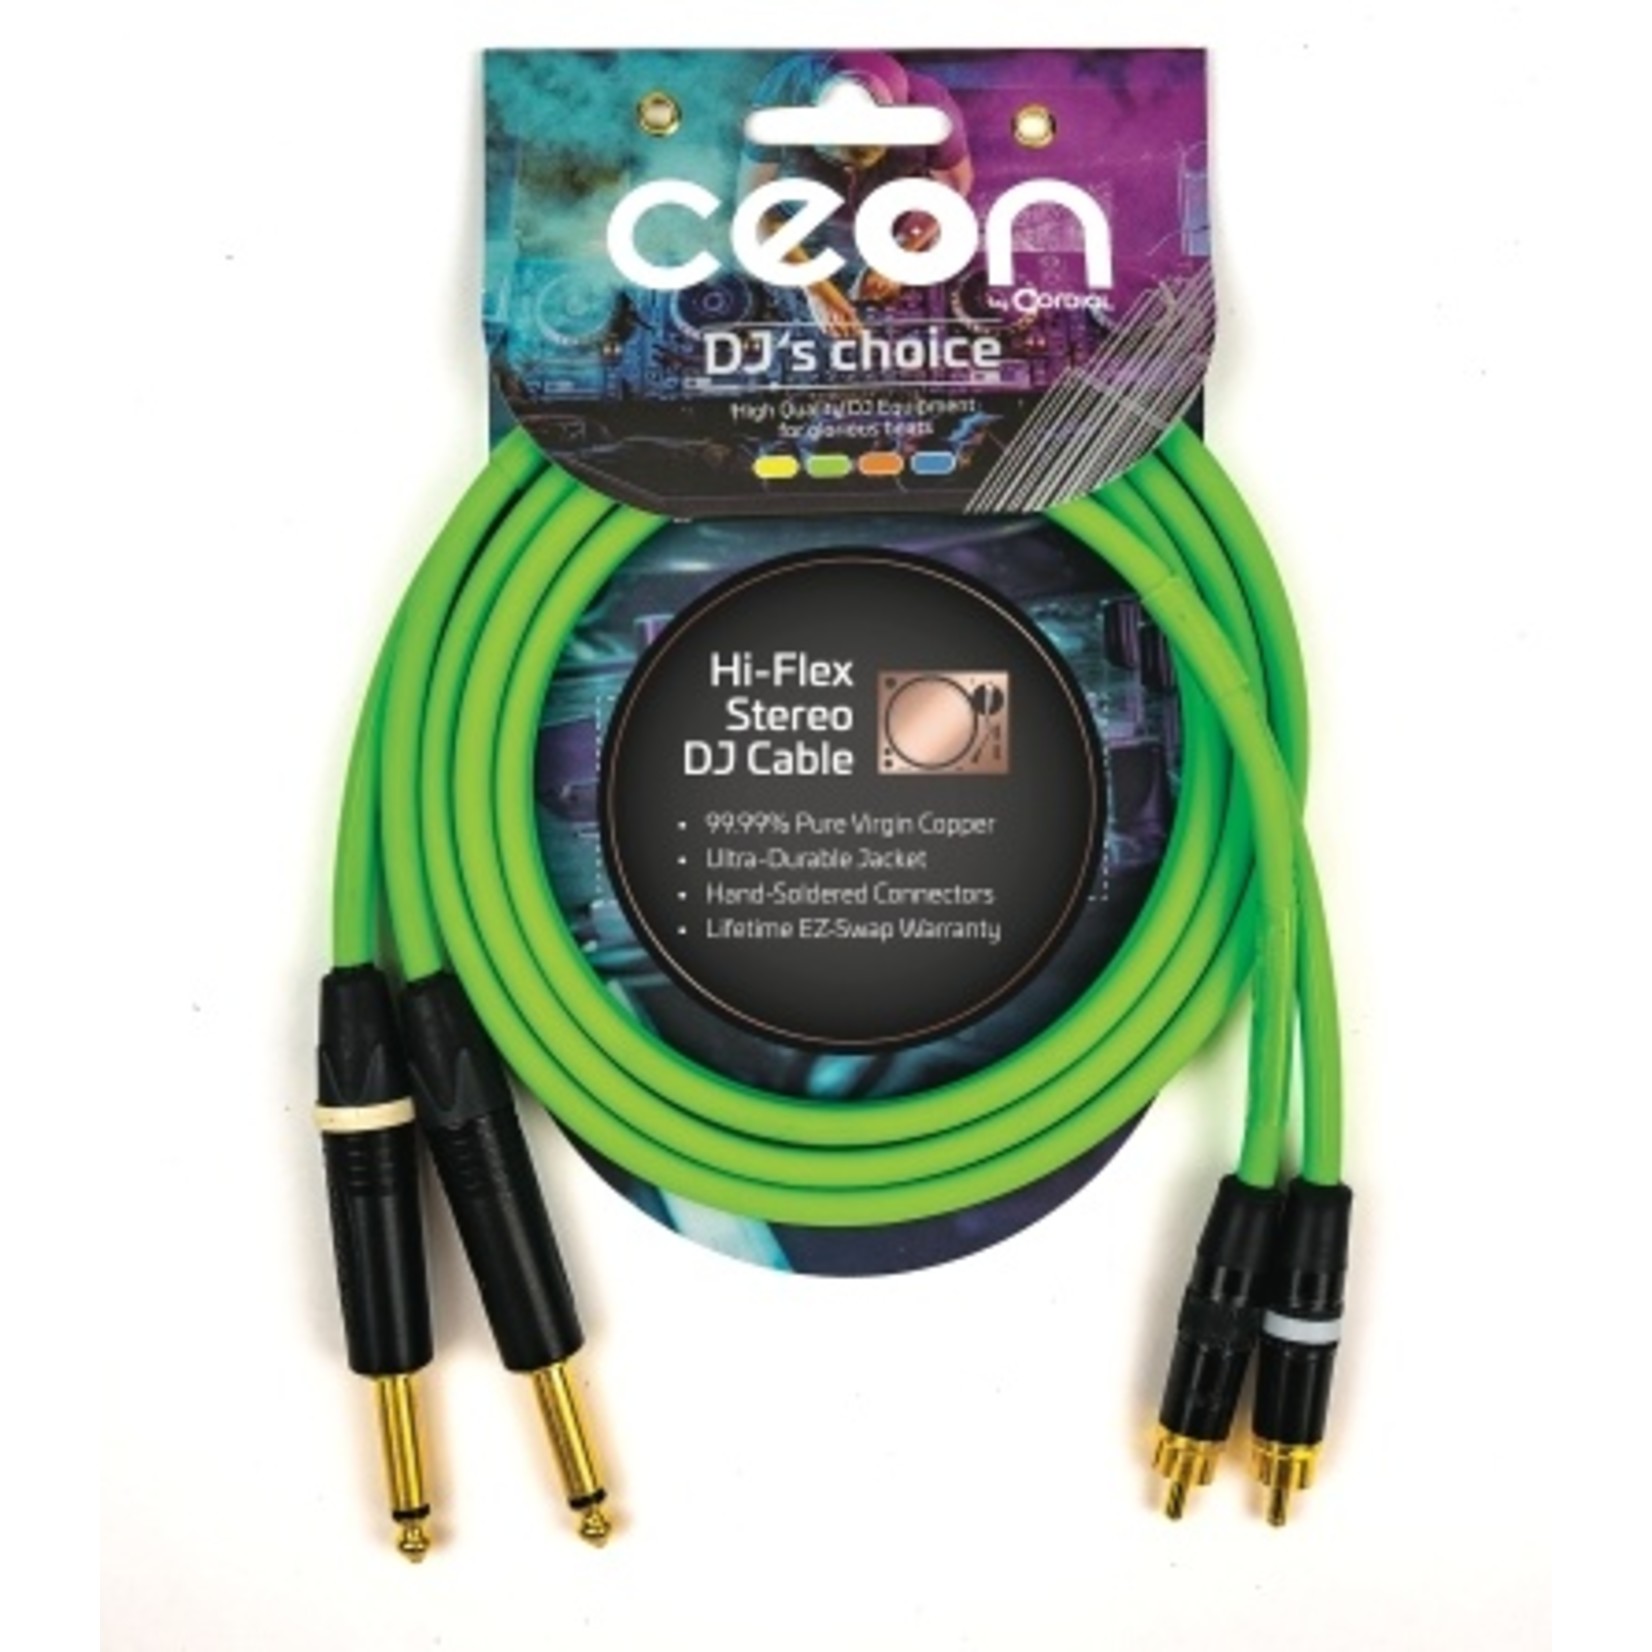 Cordial Cables Cordial Cables Premium DJ Dual/Mono (Black Light) Cable, Ceon Series - Hi-Flex DJ's Choice Stereo RCA to 1/4" TS 10-Foot Cable: Neon Green